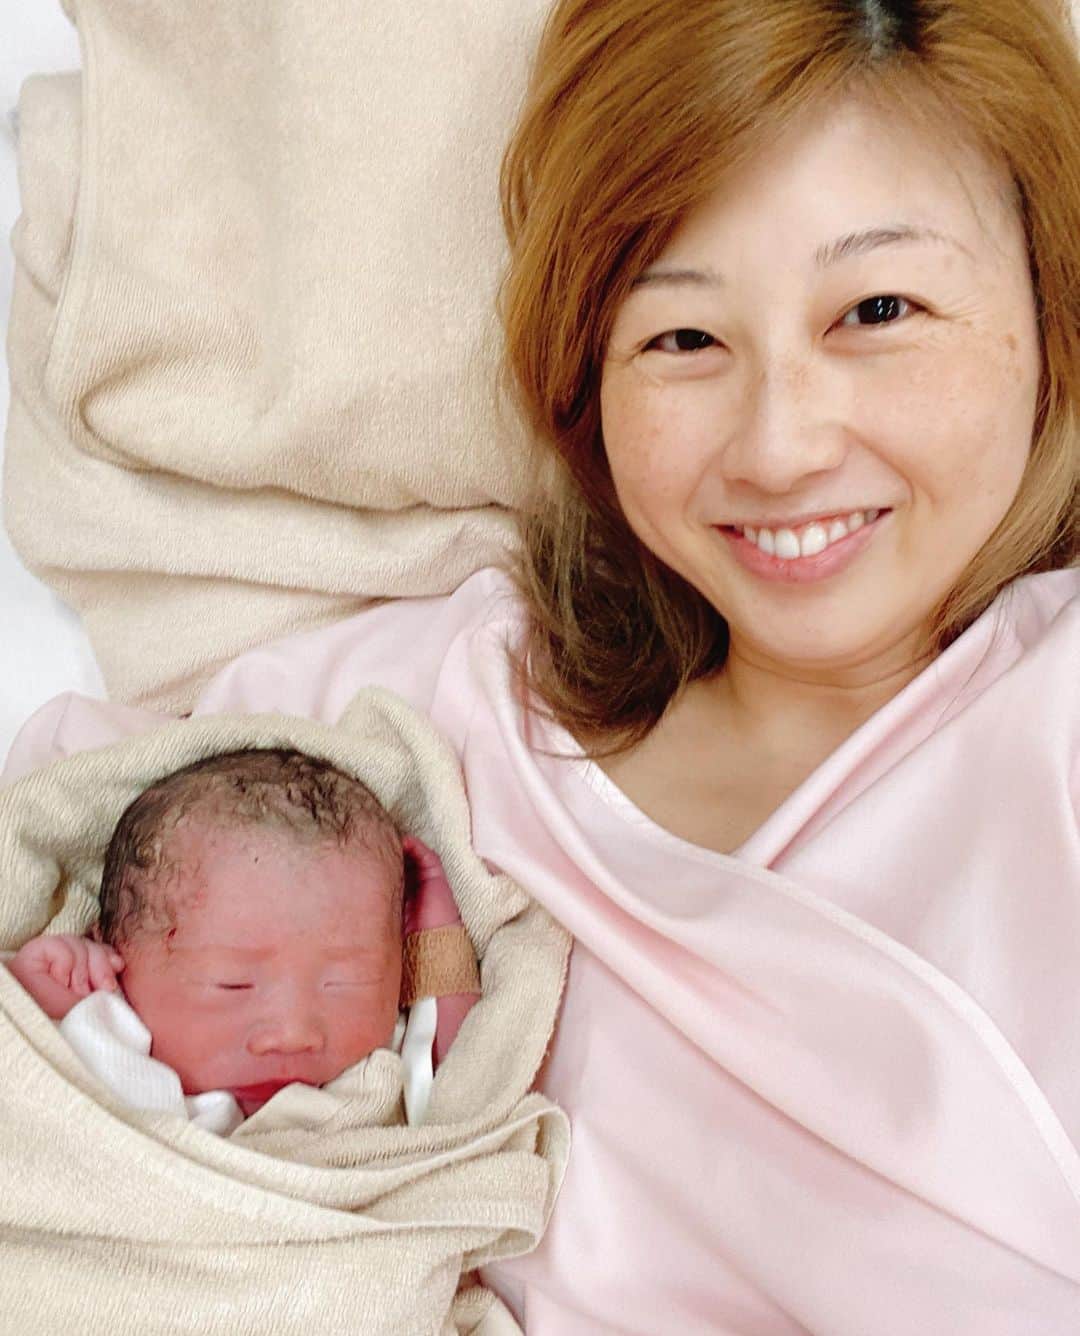 吉田ちかのインスタグラム：「👶🏻💕✨Our baby is here✨💕👶🏻  This may come as a bit of a surprise since I was just posting about getting out of the hospital where I’ve been for the last two weeks getting bedrest to prevent preterm labor…  but here he is!!   I entered 37 weeks yesterday and with the baby safe to come out whenever, I was scheduled to go home. But around 3AM I went into labor! And a little past 1PM, I gave birth to a healthy baby boy! It was like he was saying, “Hey, you said I could come out whenever now!”  All in all, we had a very safe delivery, but the labor pains were of course brutal and our baby was in breech position so that made for a unique delivery, and there were definitely moments when I didn’t think I could get through it.   With covid, I couldn’t have osaru-san with me like last time, but the doctors and nurses were extremely supportive and encouraging, and with their help we were  able to safely welcome our baby into the world!  Just two days ago, I was hoping to go home to see Pudding and organize the house a bit, but come to think of it, I probably would’t have gotten much done with the big belly and Pudding would have probably been like “why isn’t the baby born yet?! You have to go back to the hospital again?! “  So even though I won’t get to see Pudding for a little while longer, at least now when I go home next week I’ll have her little brother with me💕   I think it all worked out in the end. Looks like our little boy was thinking about his big sister even before he was born!!   前回の投稿では退院の話をしていたので、突然すぎてびっくりかもですが😅 昨日元気な男の子が産まれました！  実は、昨日で妊娠37週に入り、赤ちゃんがいつ産まれてもいい時期になったので一旦退院する予定だったのですが、夜中の3時にまさかの陣痛‼️そして、13時過ぎに元気な男の子が産まれました❤️  安産ではありましたが、陣痛の痛みはもちろん辛くて、逆子の経膣分娩という比較的珍しいお産だったということもあり、後半は心が折れそうになった瞬間もありました😭   コロナ禍で前回のようにおさるさんに立ち会ってもらうこともできず、少し不安もありましたが、優しい先生たちと助産師さんさんたちがずっと支えてくれて、無事に産むことができました。  一昨日までは、一旦退院してプリンに会って、家を少し整えたいと思っていましたが😅 実際帰ったところで大きなお腹では何もできなかっただろうし、プリンも「なんでまだ産まれてないの？？また病院に行くの？？」ってなったかと思いますw   プリンにはもう少し我慢してもらうことになりますが、来週会う時にはbabyと一緒にお家に帰れる💕その方が結果良かったのかも！既にお姉ちゃん想いのベビーです👶🏻✨  皆さん、沢山の応援メッセージありがとうございました❤️本日、午後から母子同室なにるので、楽しみです😆」